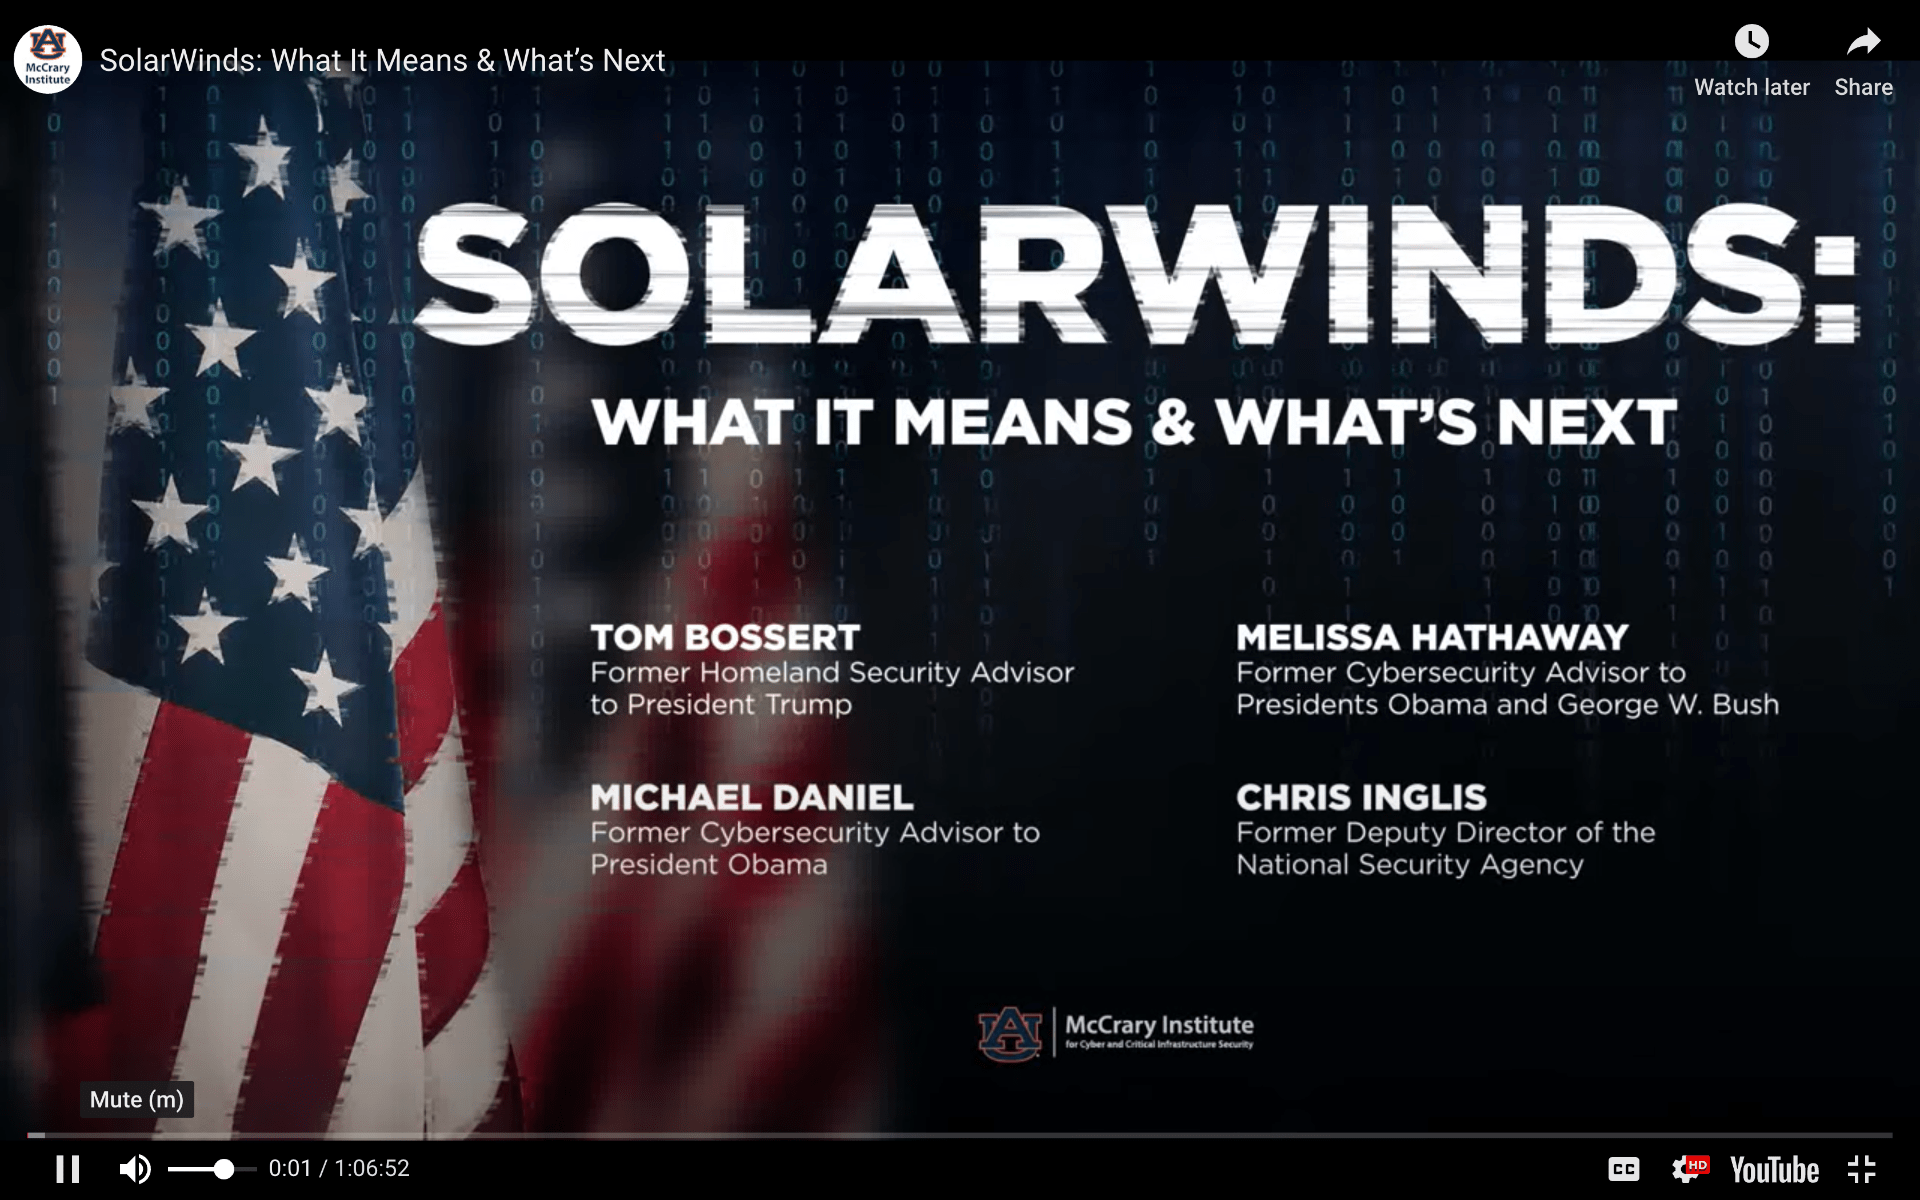 SolarWinds: What It Means & What’s Next